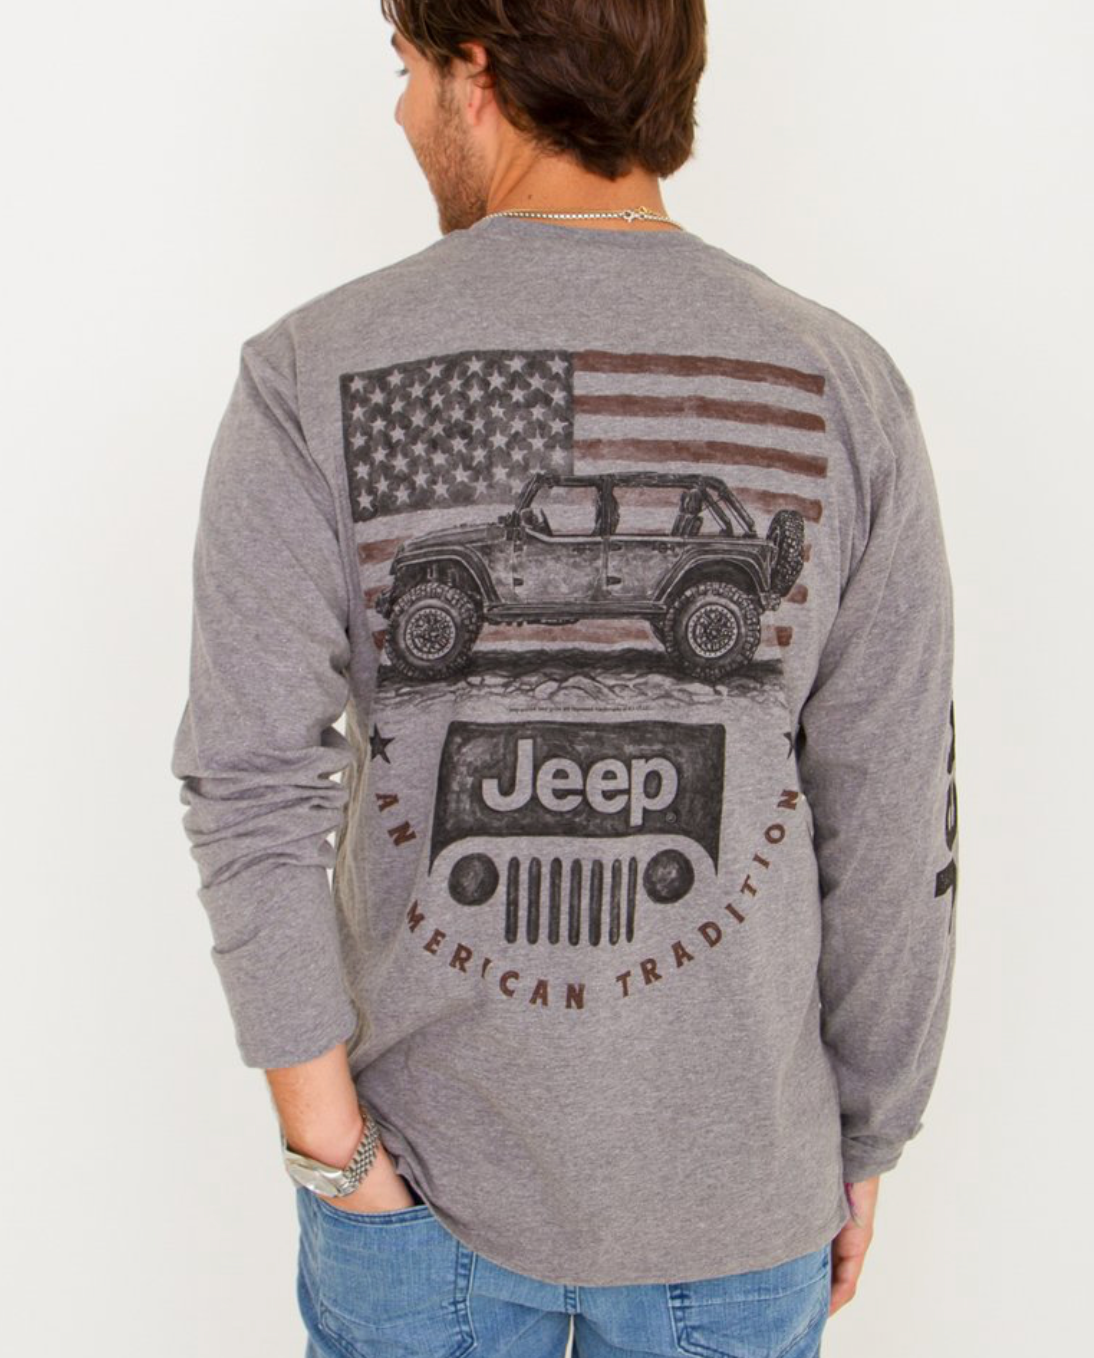 JEEP LS AMERICAN TRADITION